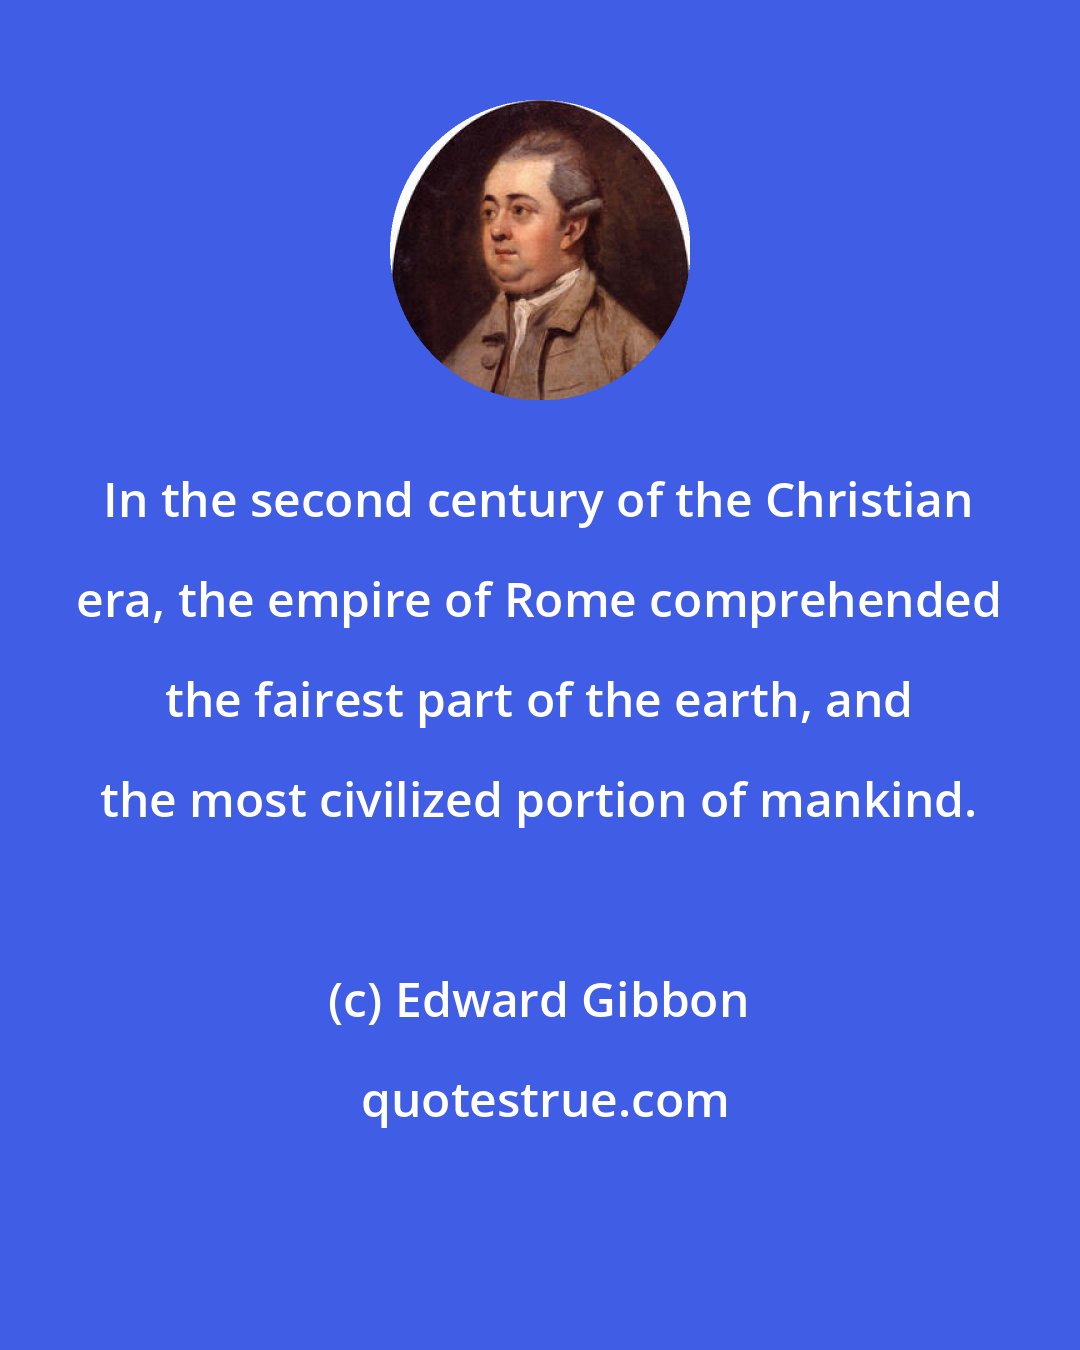 Edward Gibbon: In the second century of the Christian era, the empire of Rome comprehended the fairest part of the earth, and the most civilized portion of mankind.